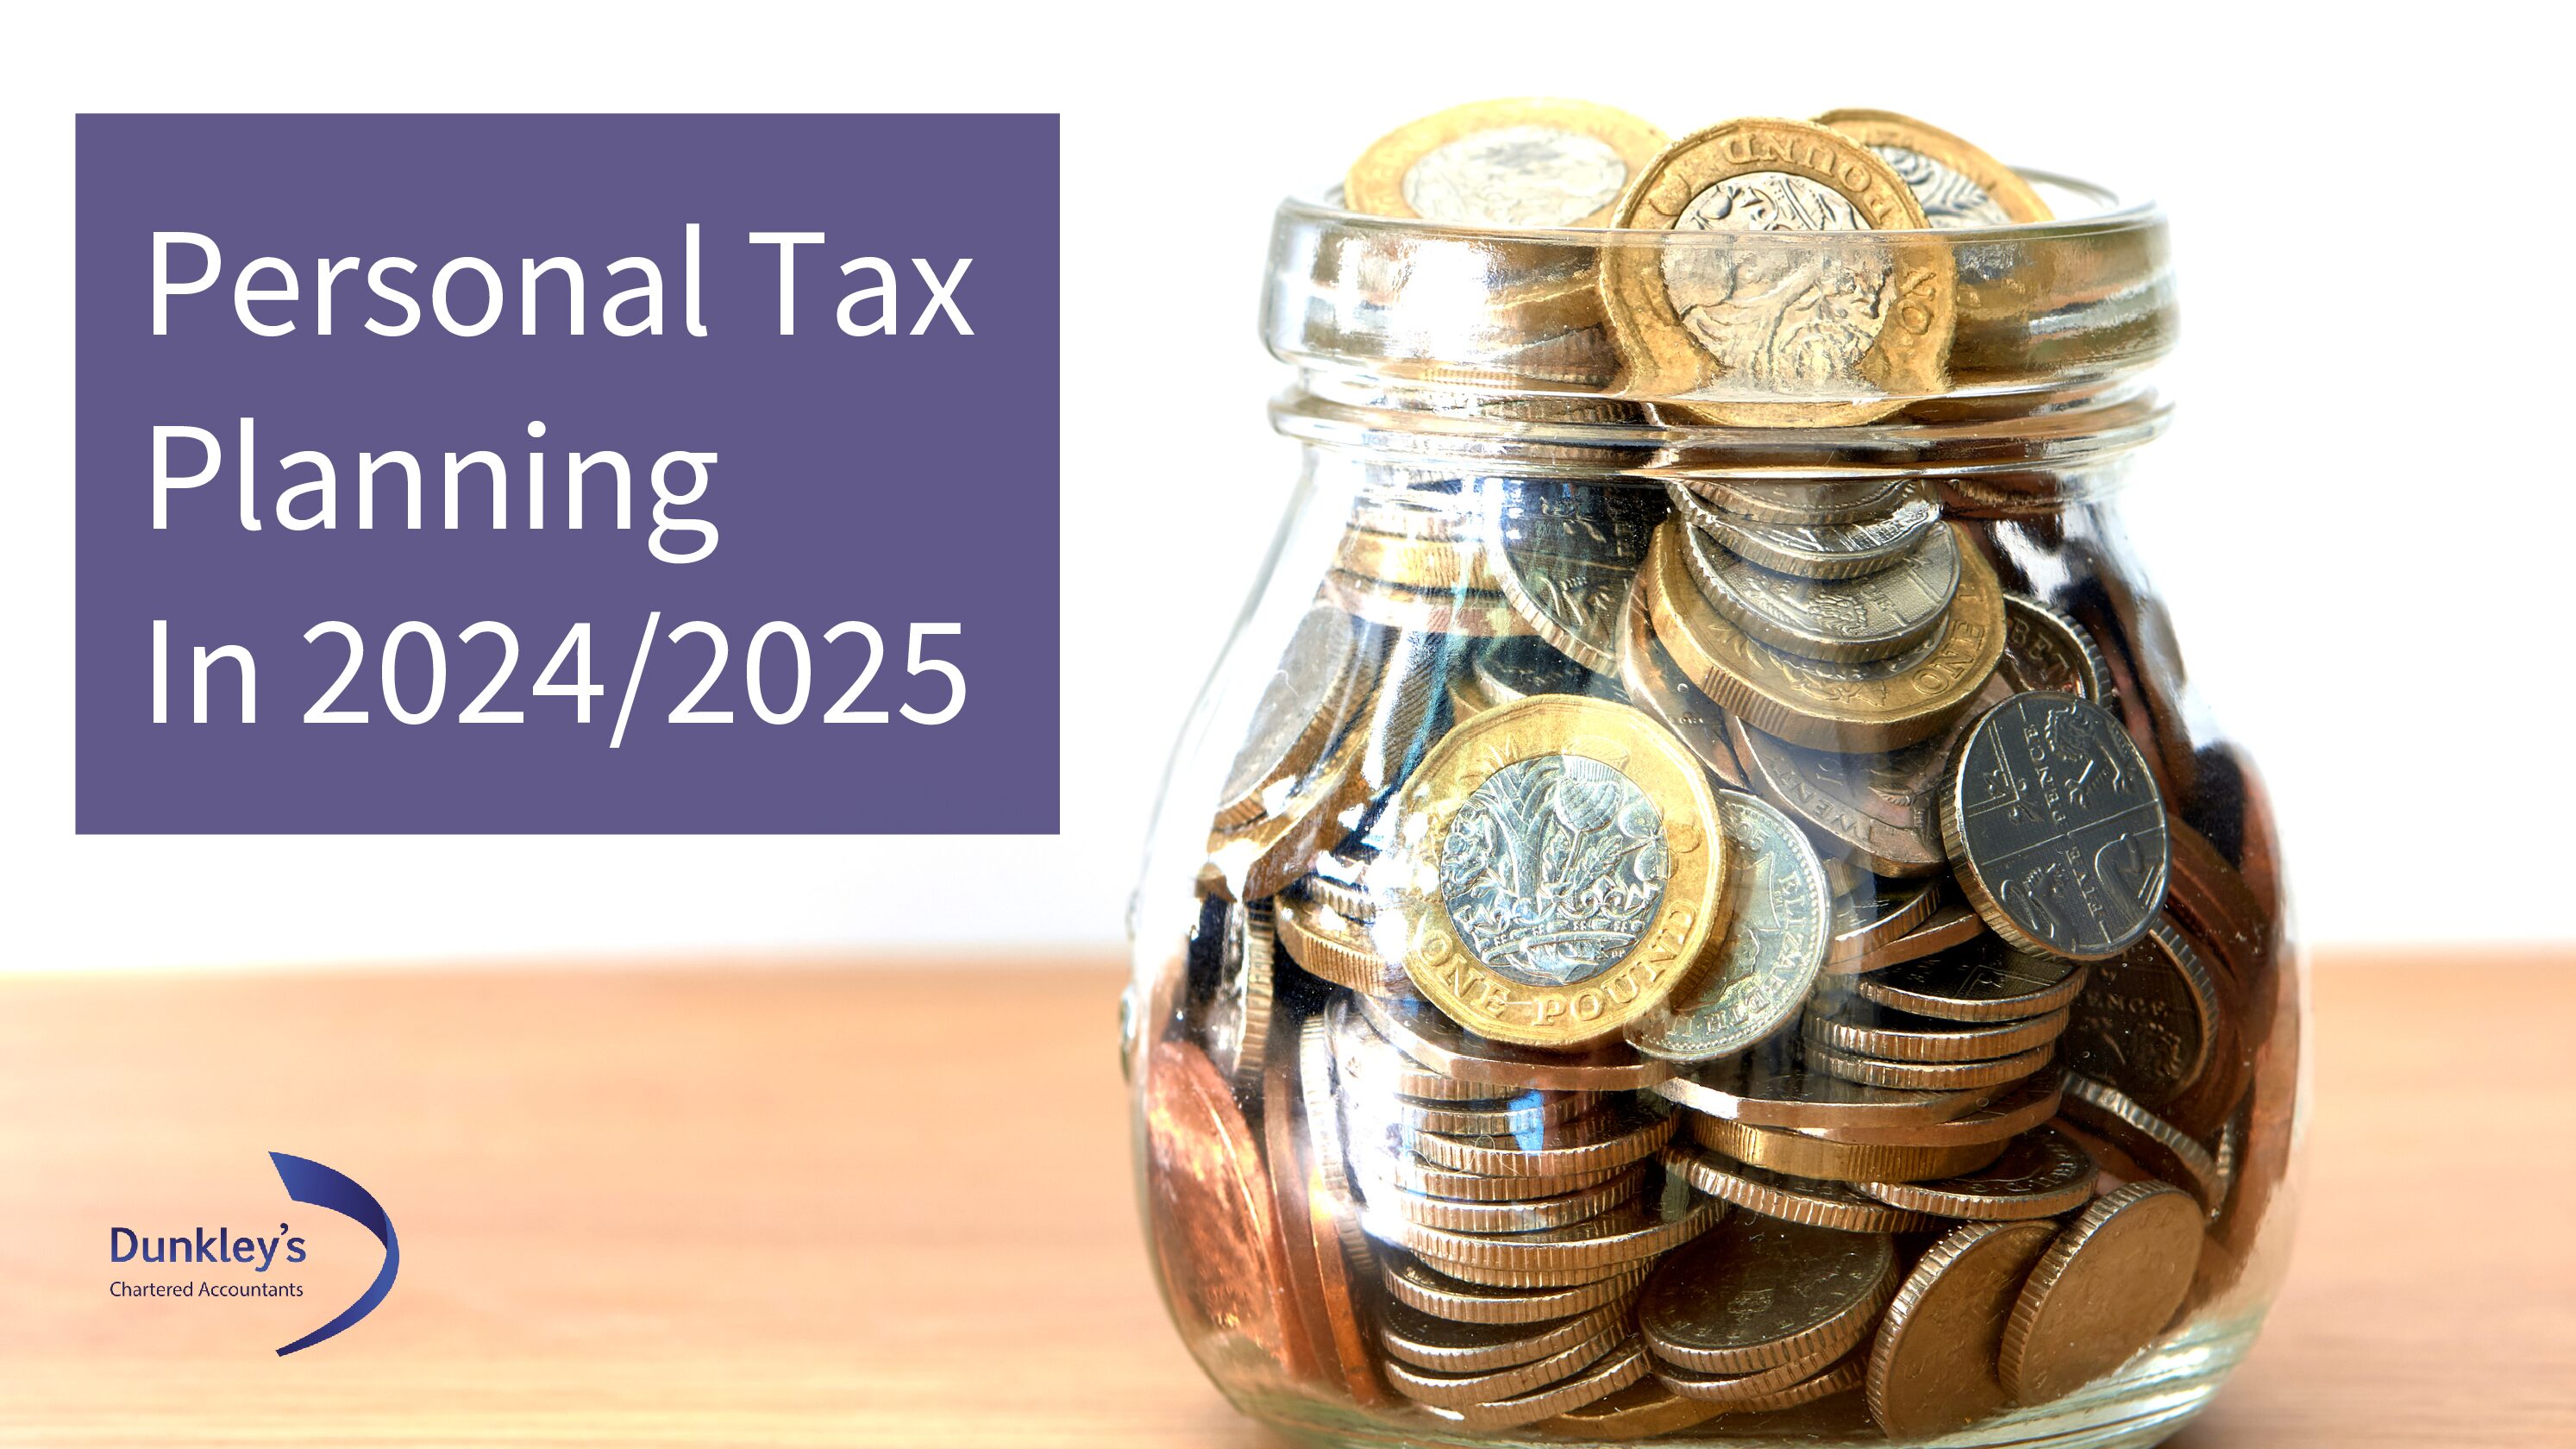 Personal Tax Planning in 2024/2025